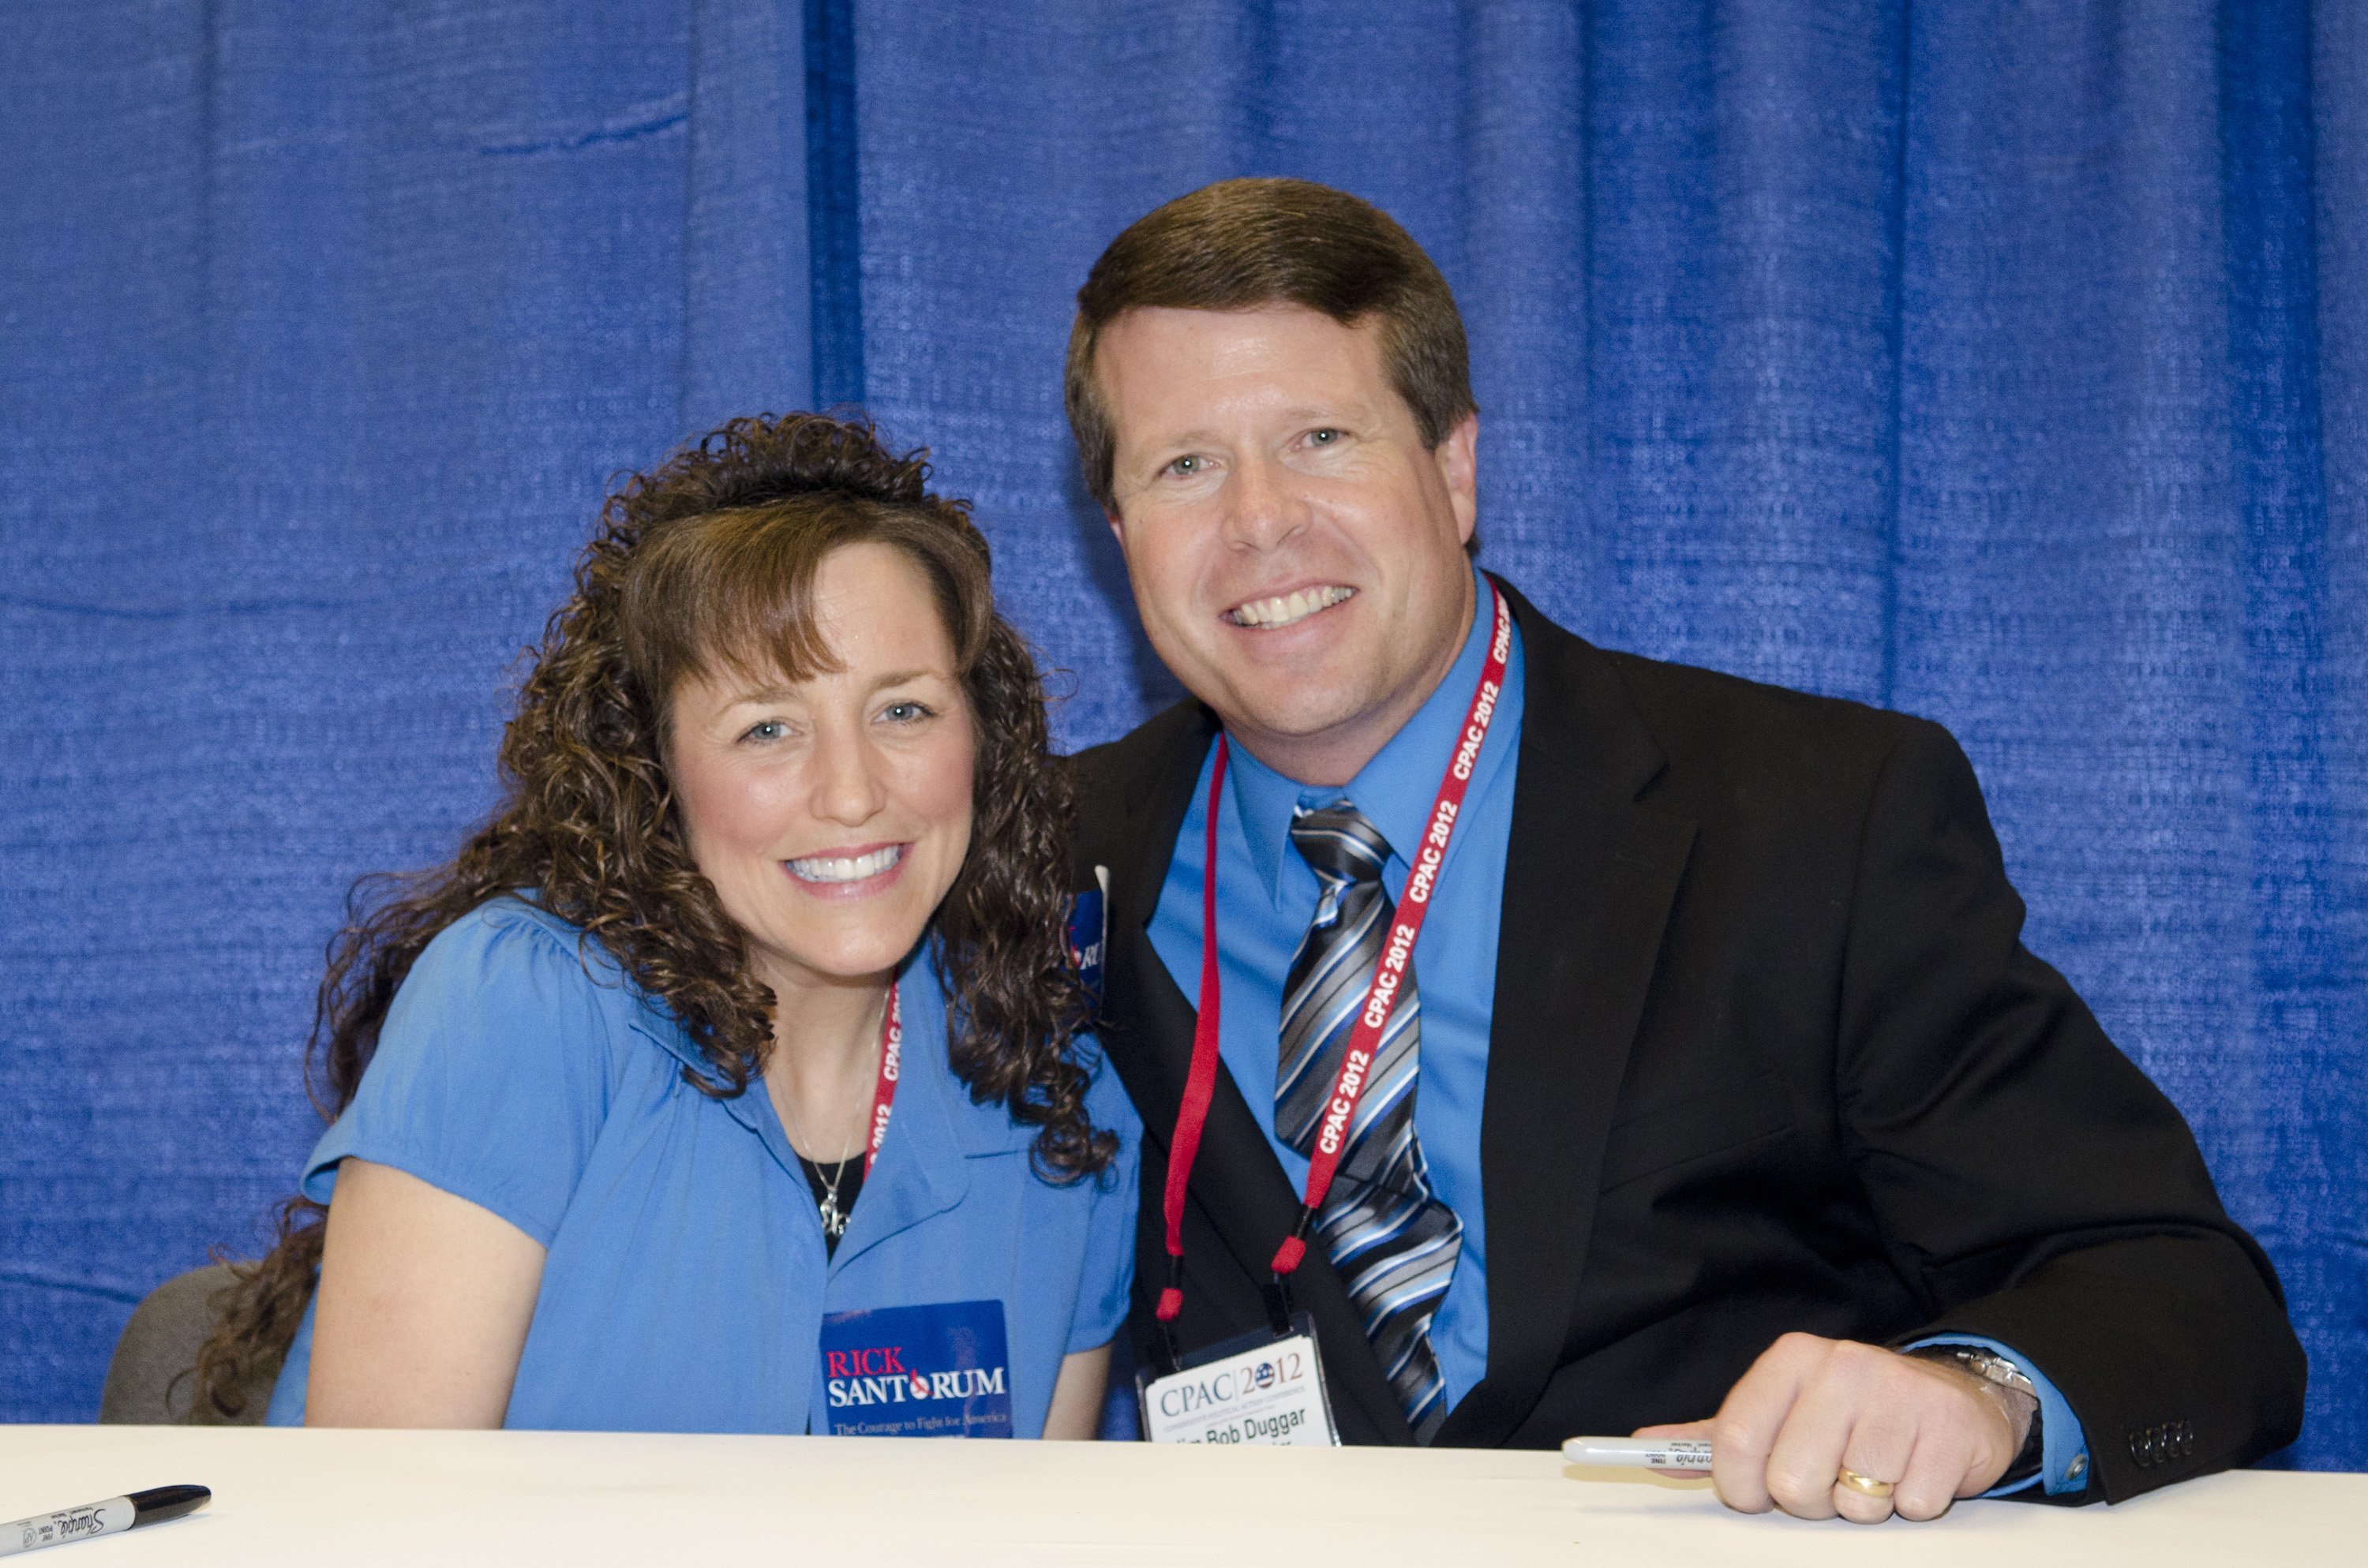 Michelle Duggar and Jim Bob Duggar at the Conservative Political Action Conference (CPAC) on February 10, 2012. | Photo: GettyImages